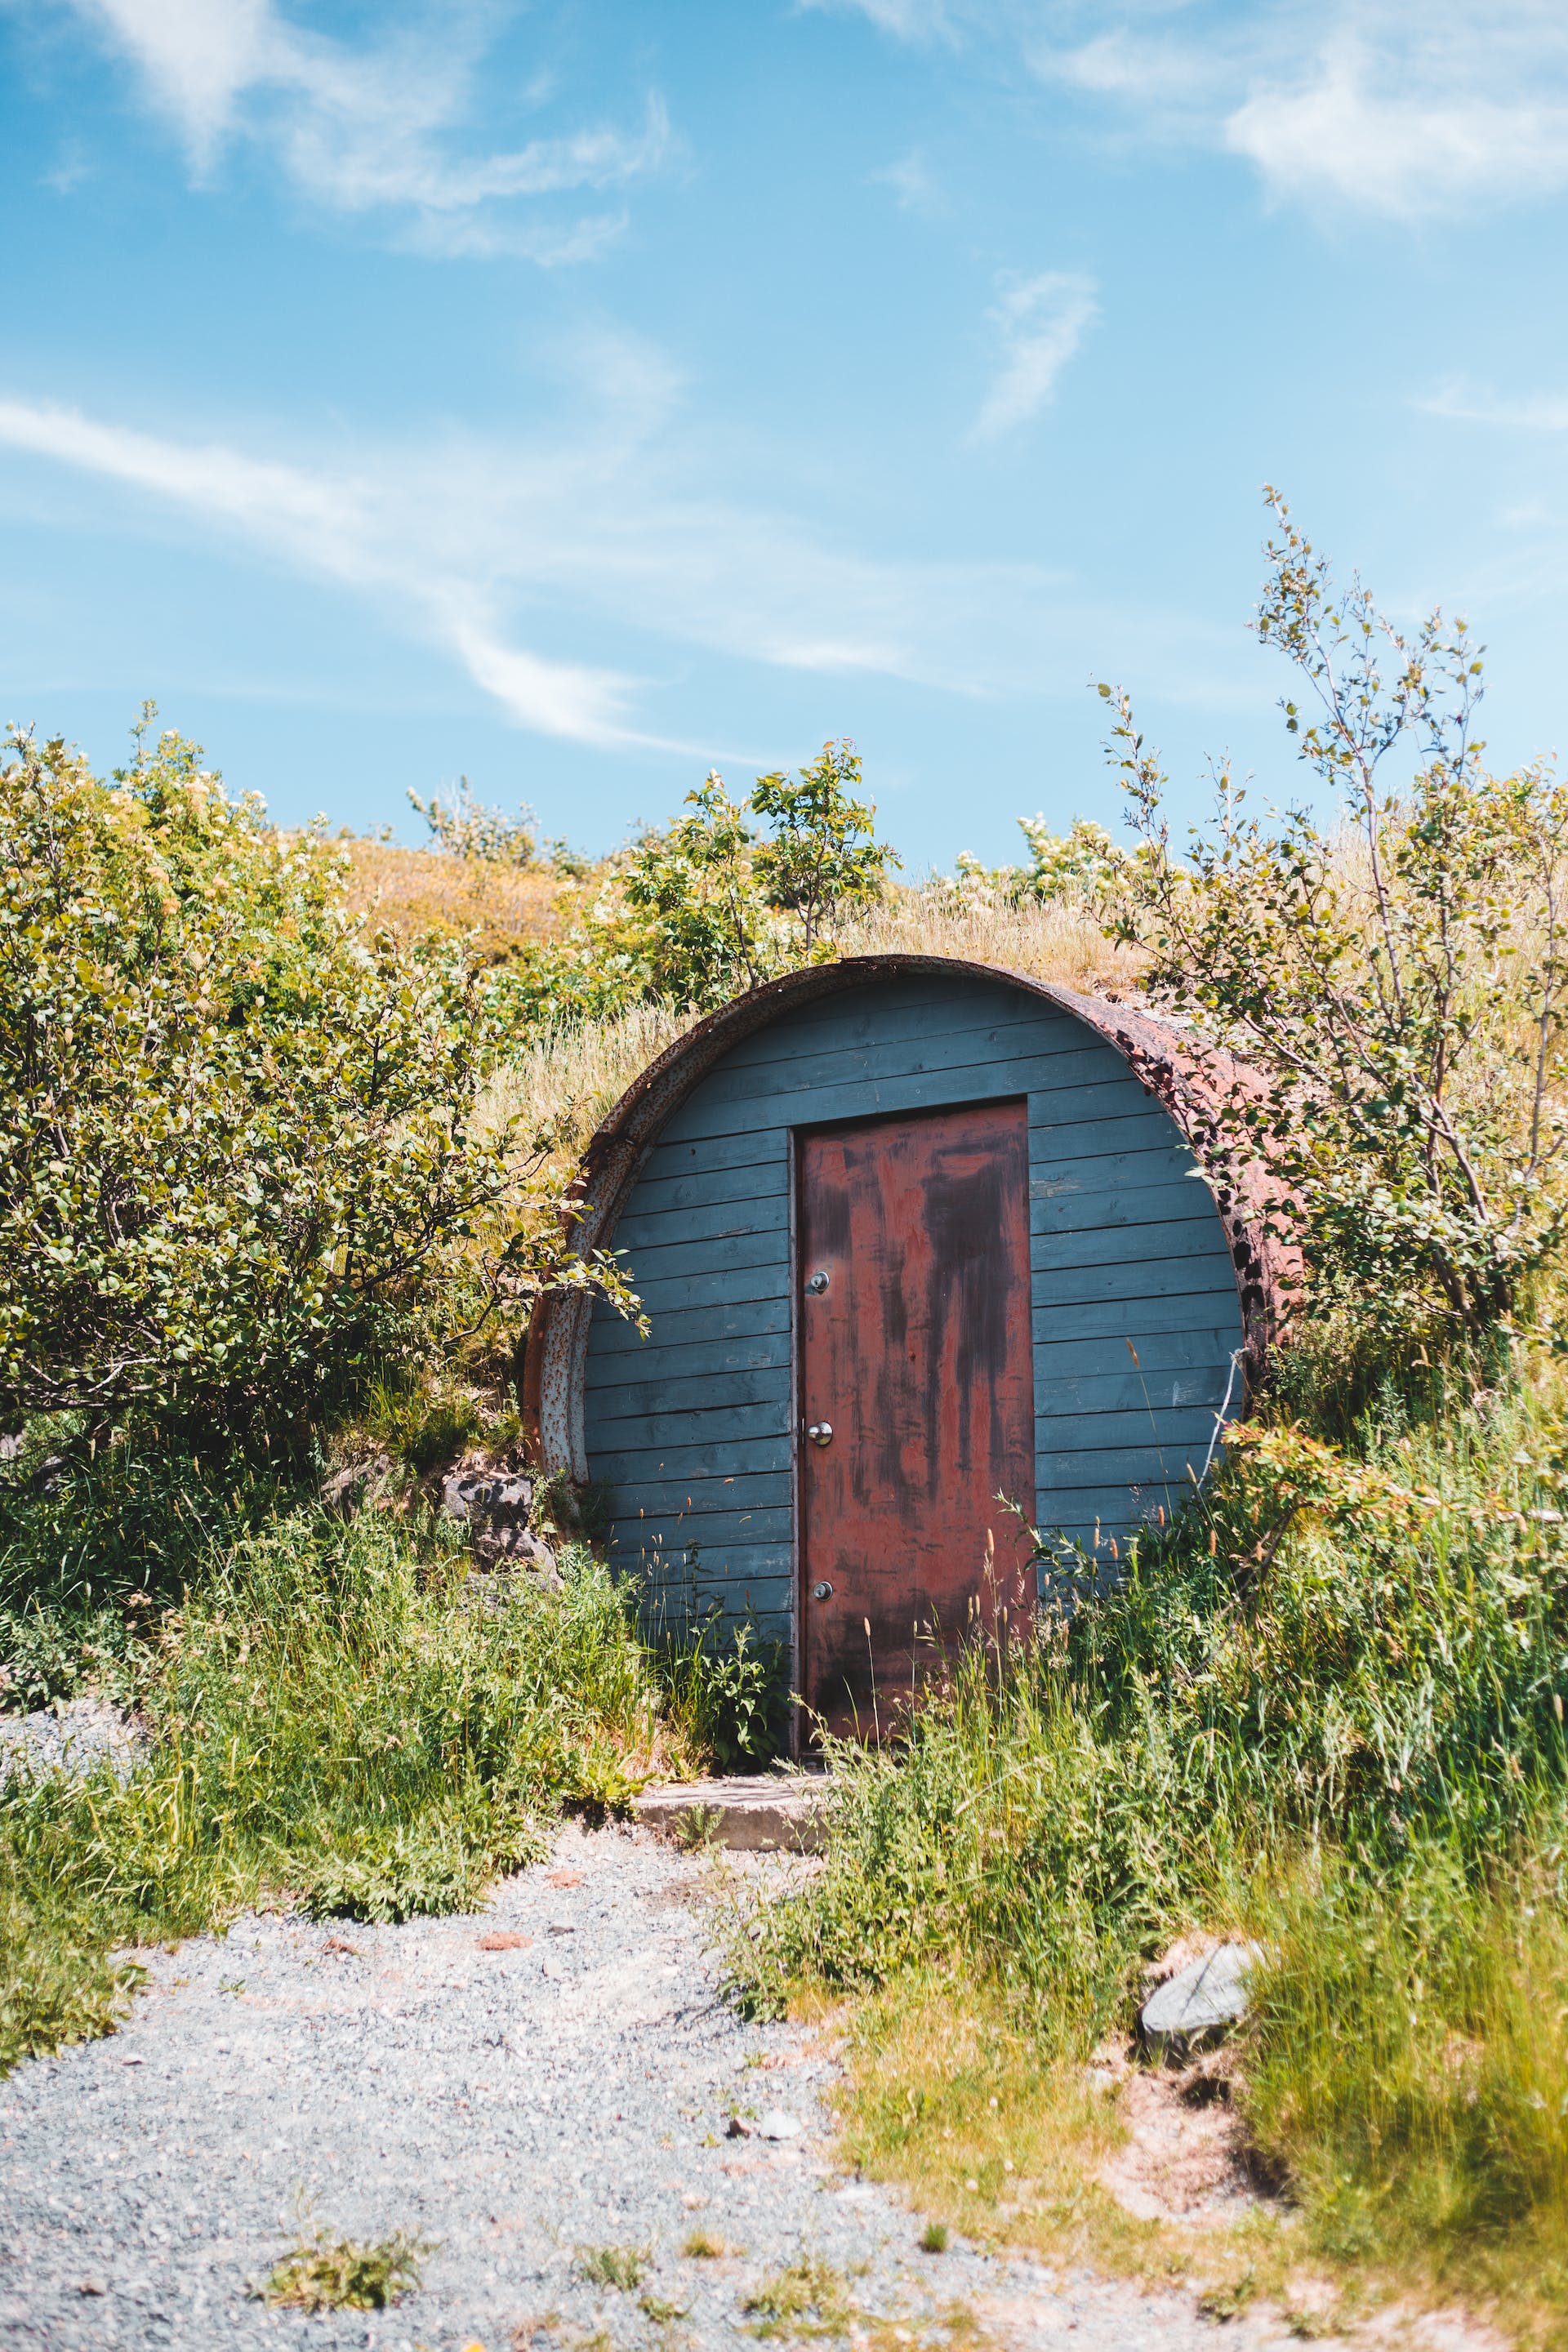 A door surrounded by bushes | Source: Pexels